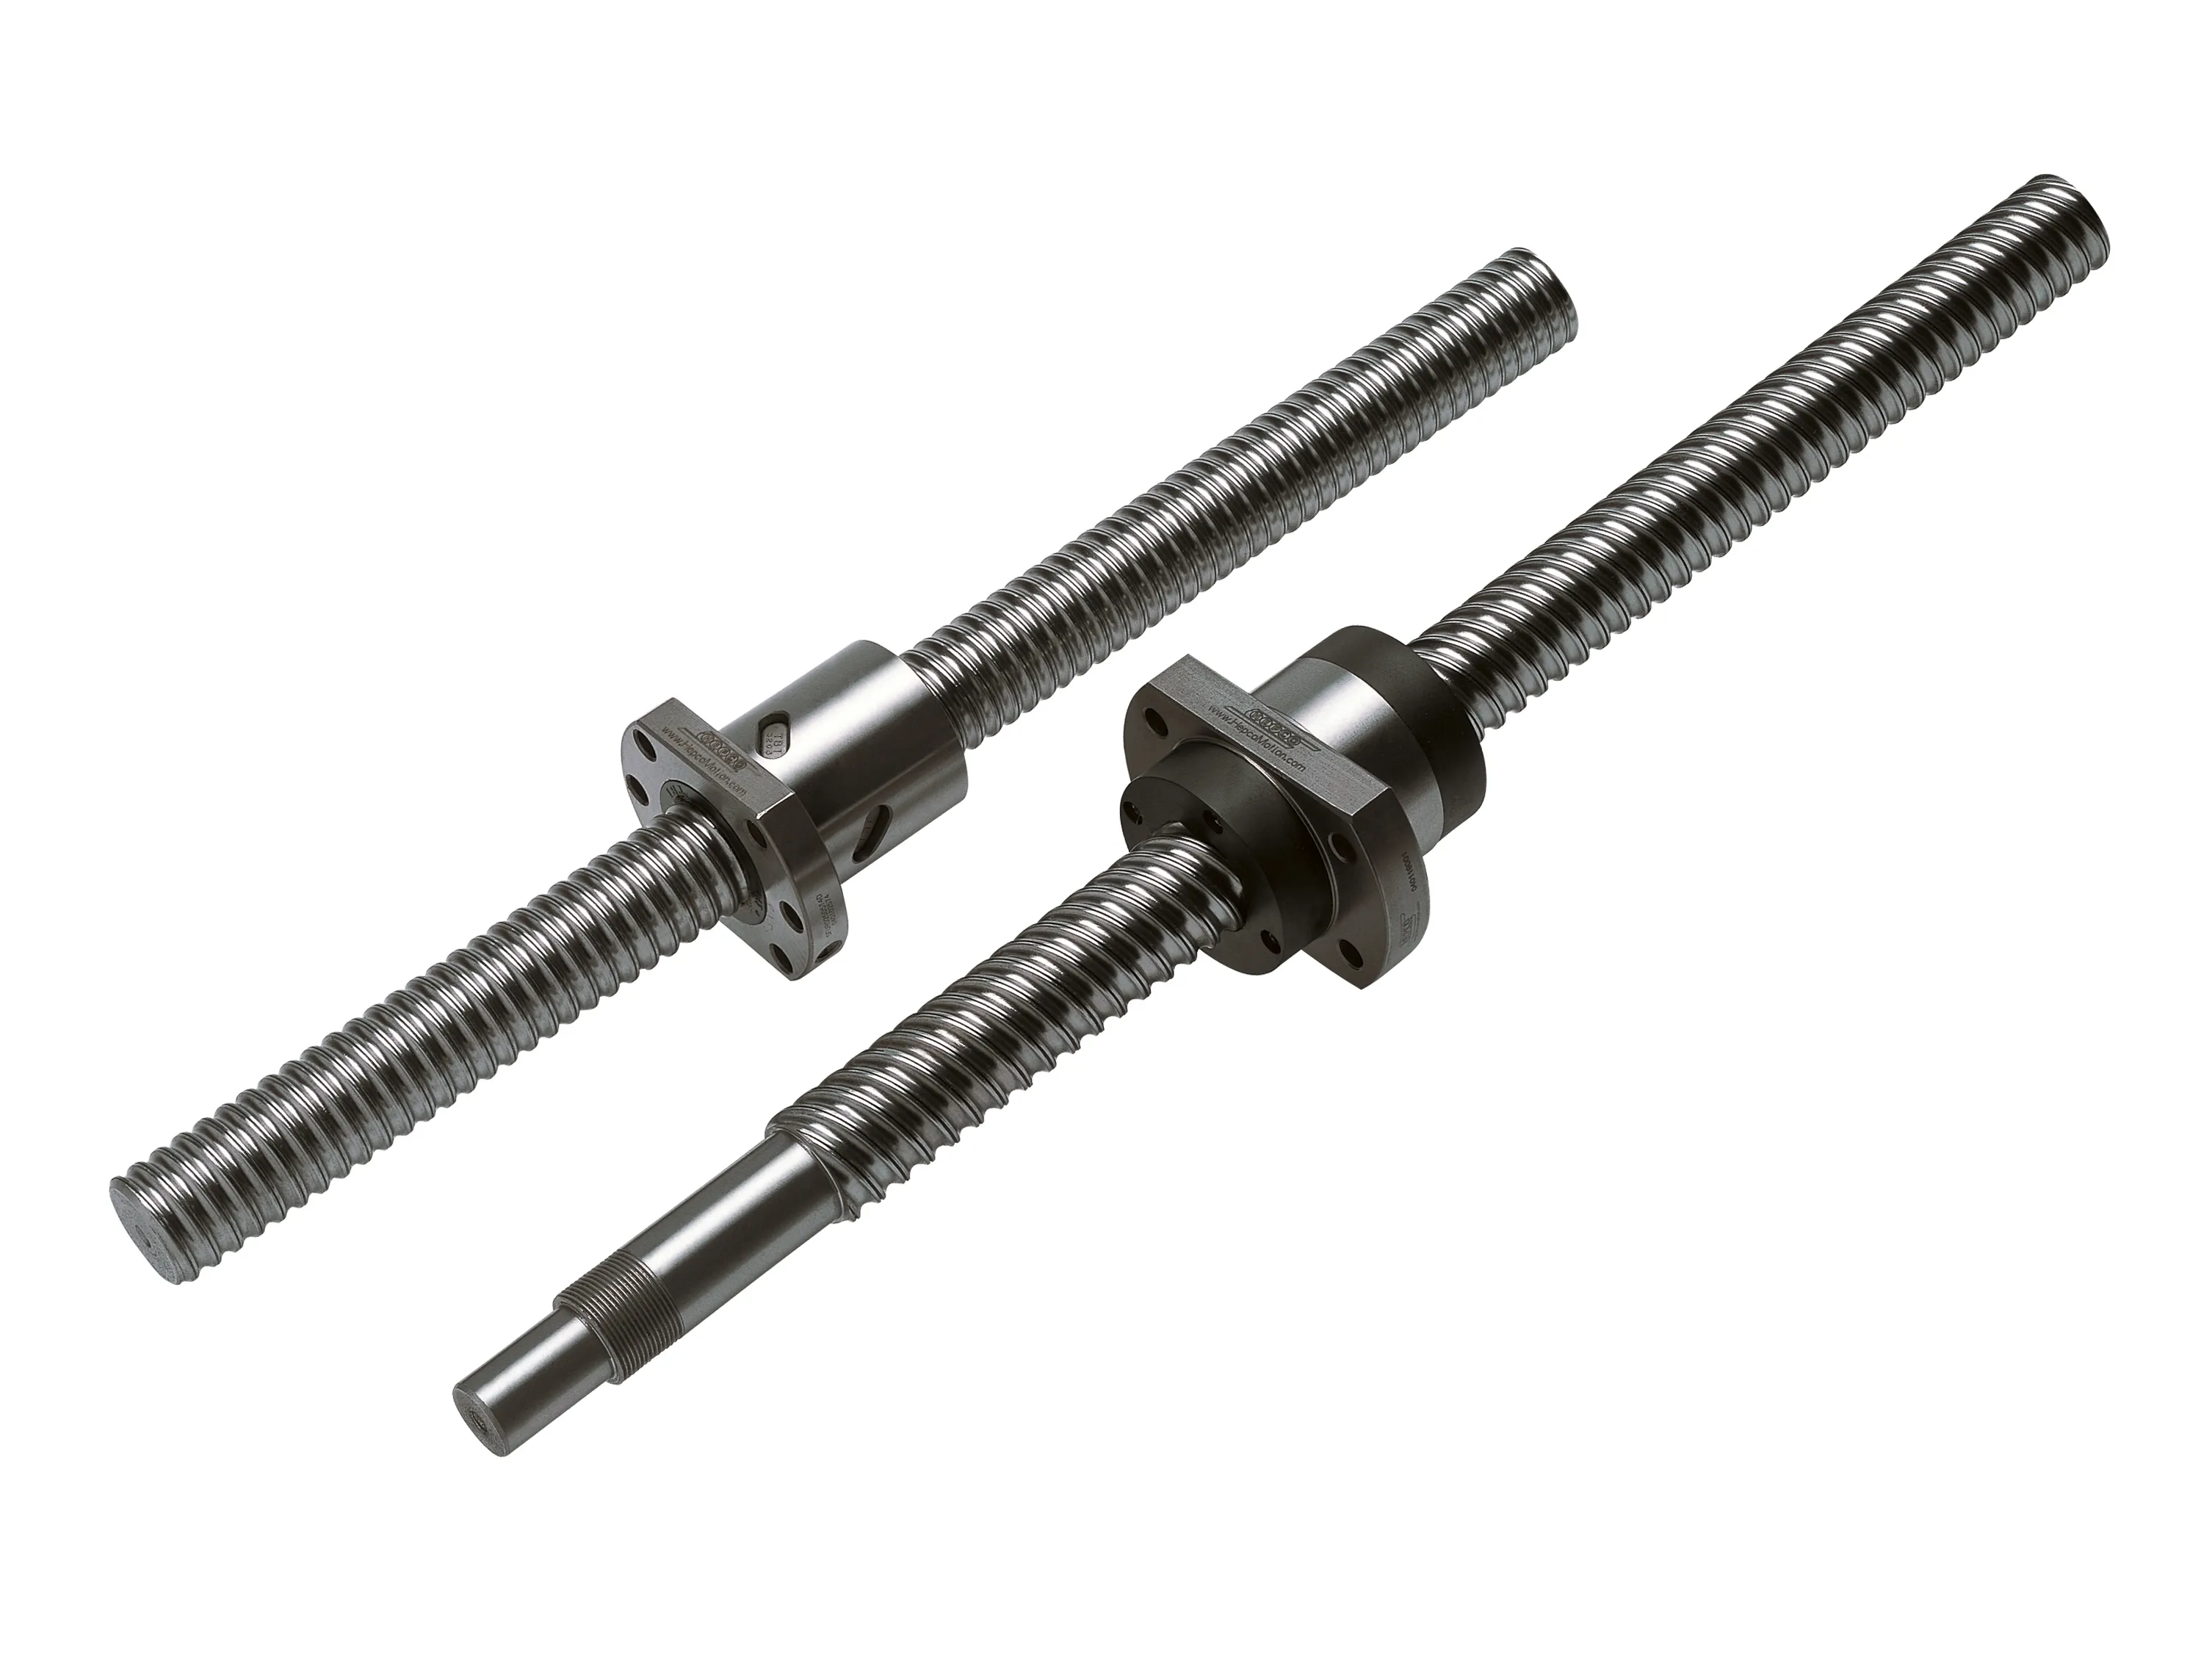 Ball screws and nuts